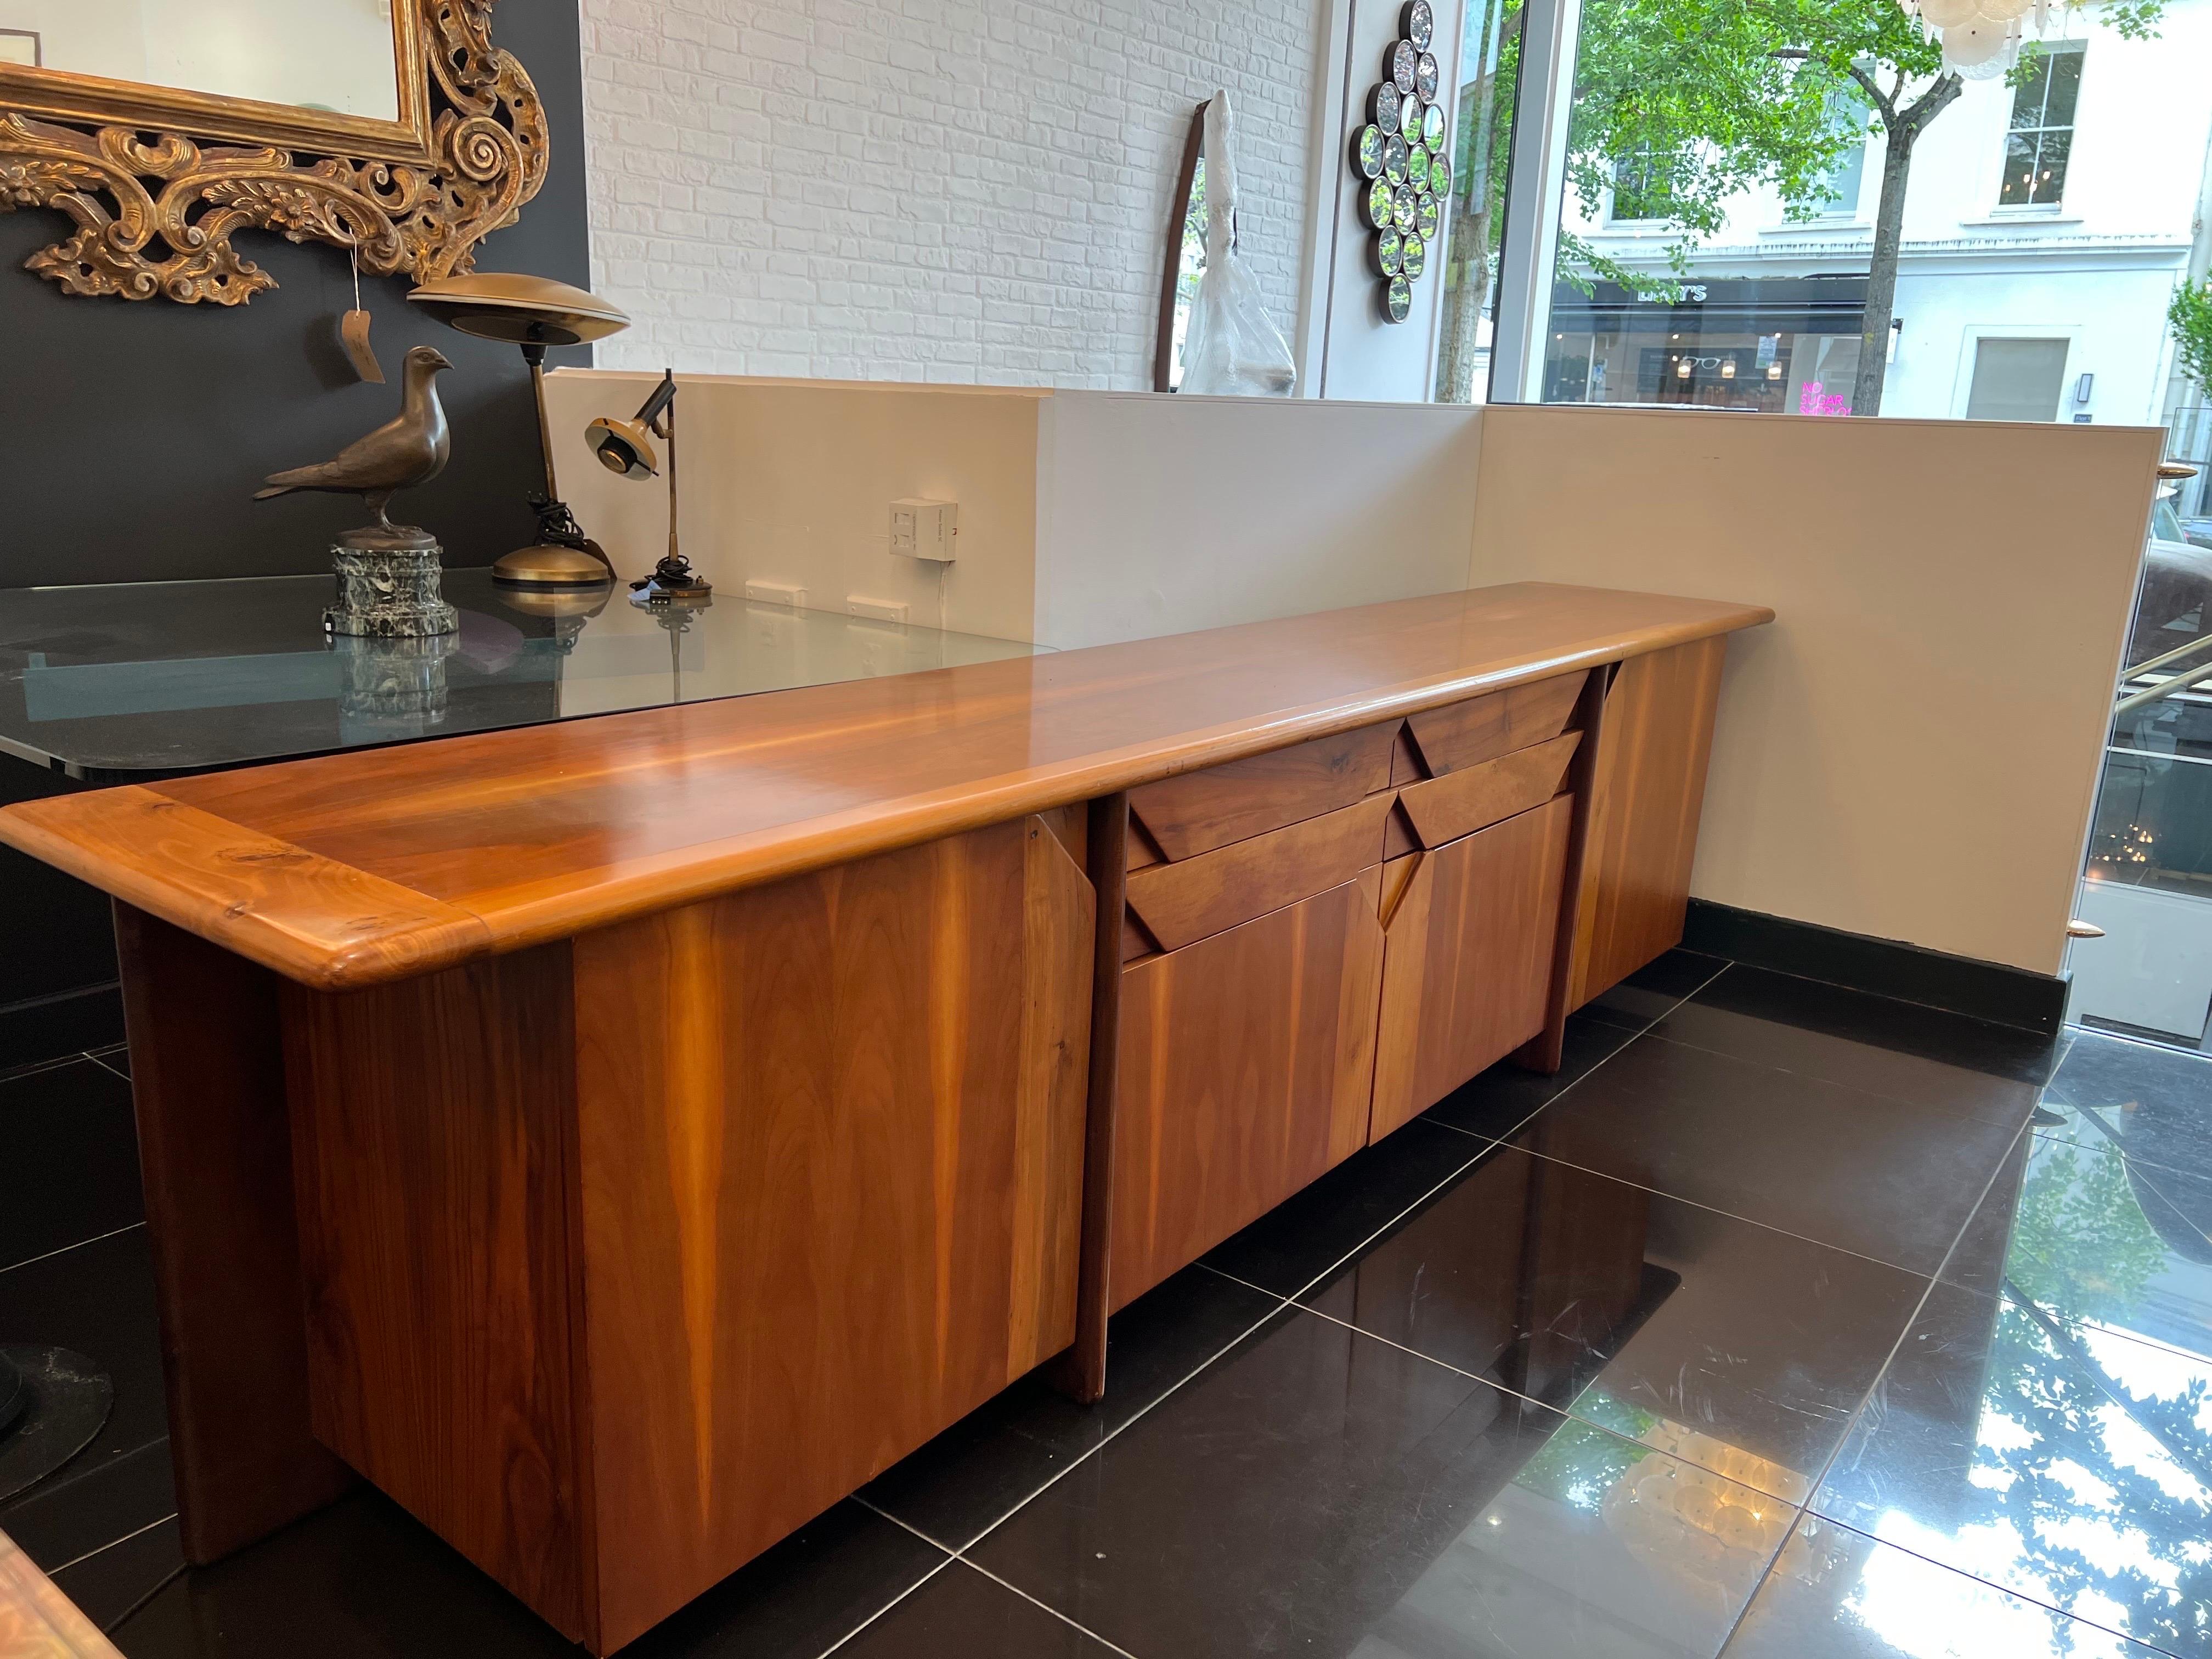 An extraordinary walnut credenza by Ammanati & Vitelli in a fabulous architectural design with four doors and four drawers. The cabinet can be dismantled in four sections with a single 2.85m top for ease of transport and shipping. 

Dimensions: